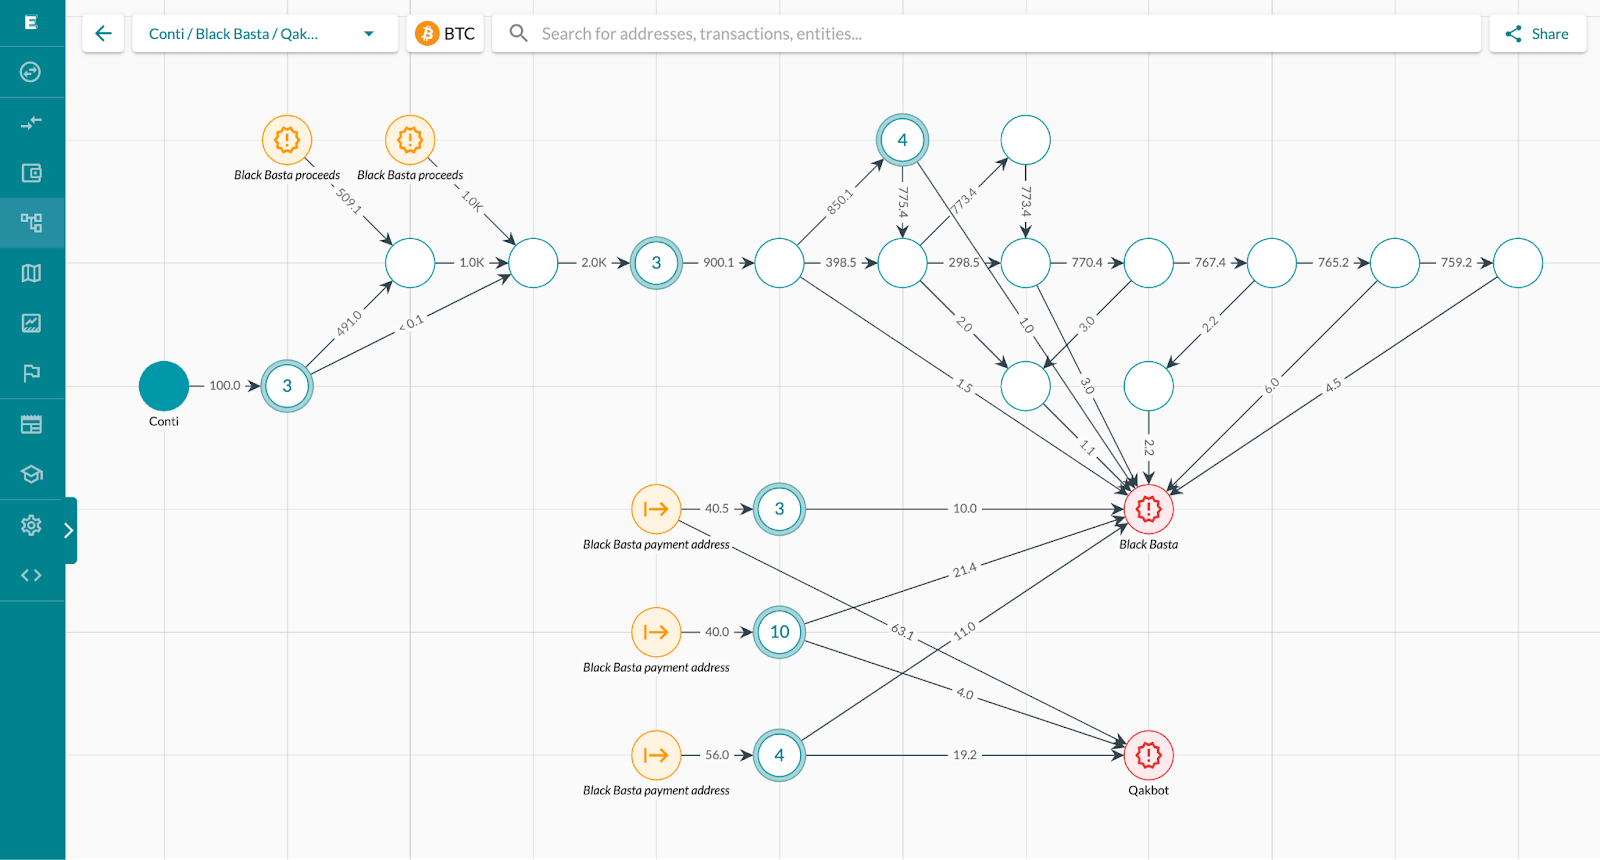 [LINE GRAPH] A screenshot from Elliptic Investigator, showing transactional links between Conti, Qakbot and Black Basta